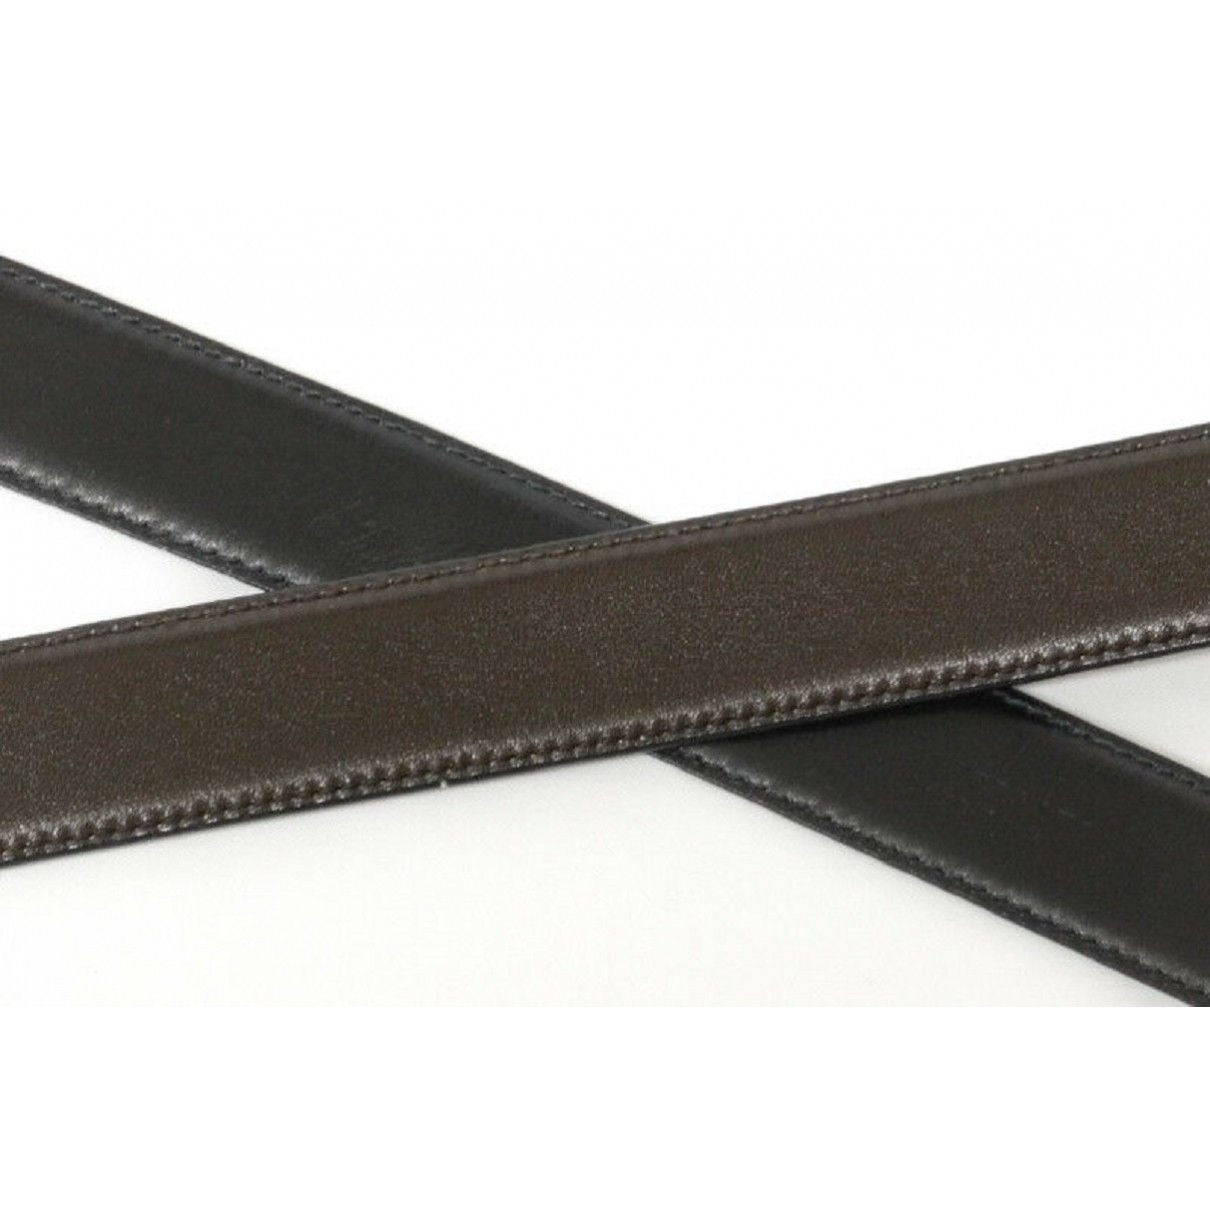 Vintage, Gucci, 44" long x 1.25" wide, brown or black leather, reversible belt in size 40" with a dual sided, two-tone engraved GG buckle